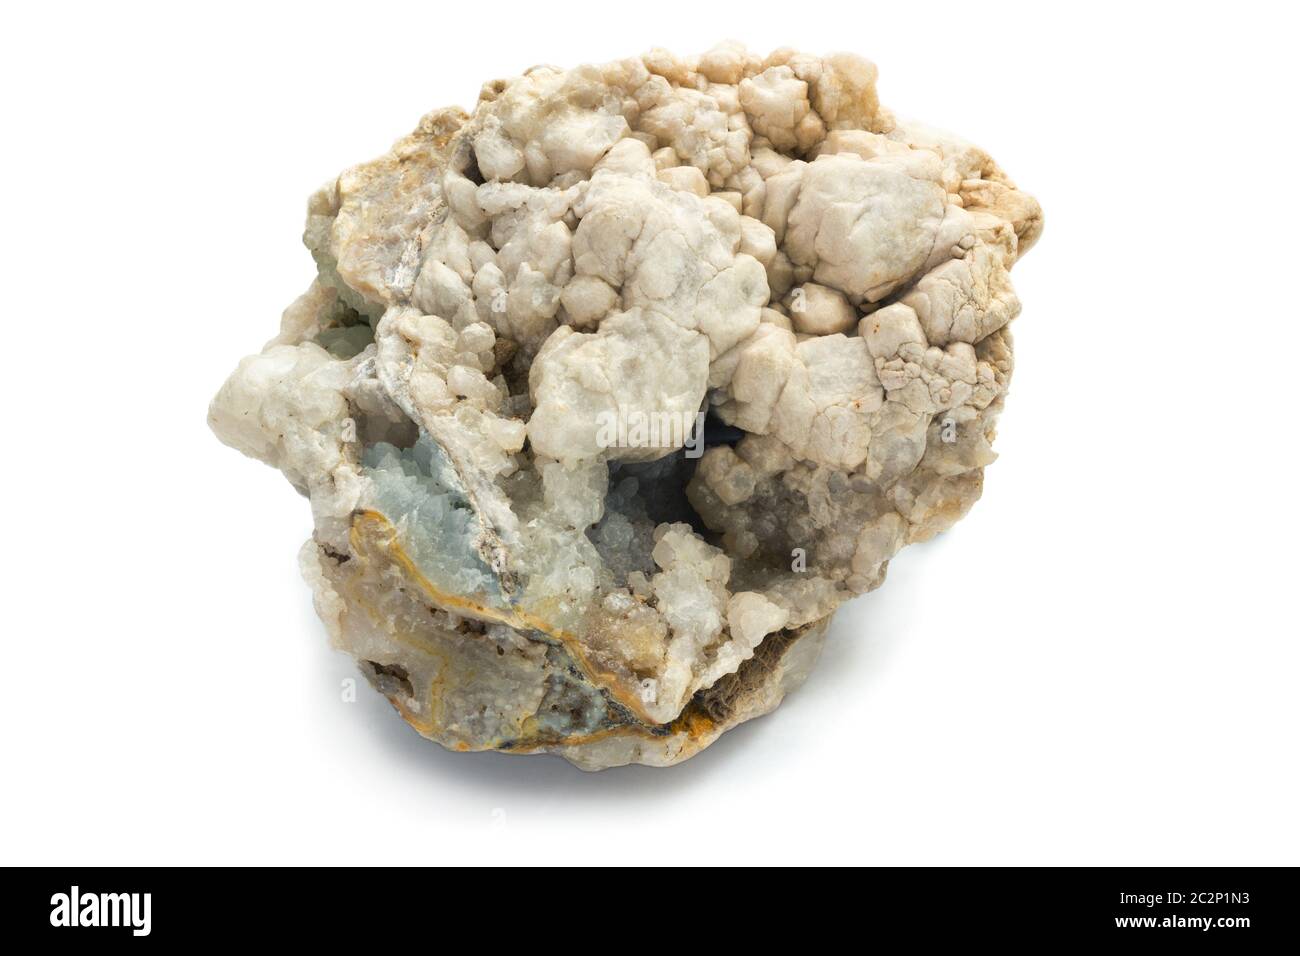 Concretion of minerals with small cavities inside Stock Photo